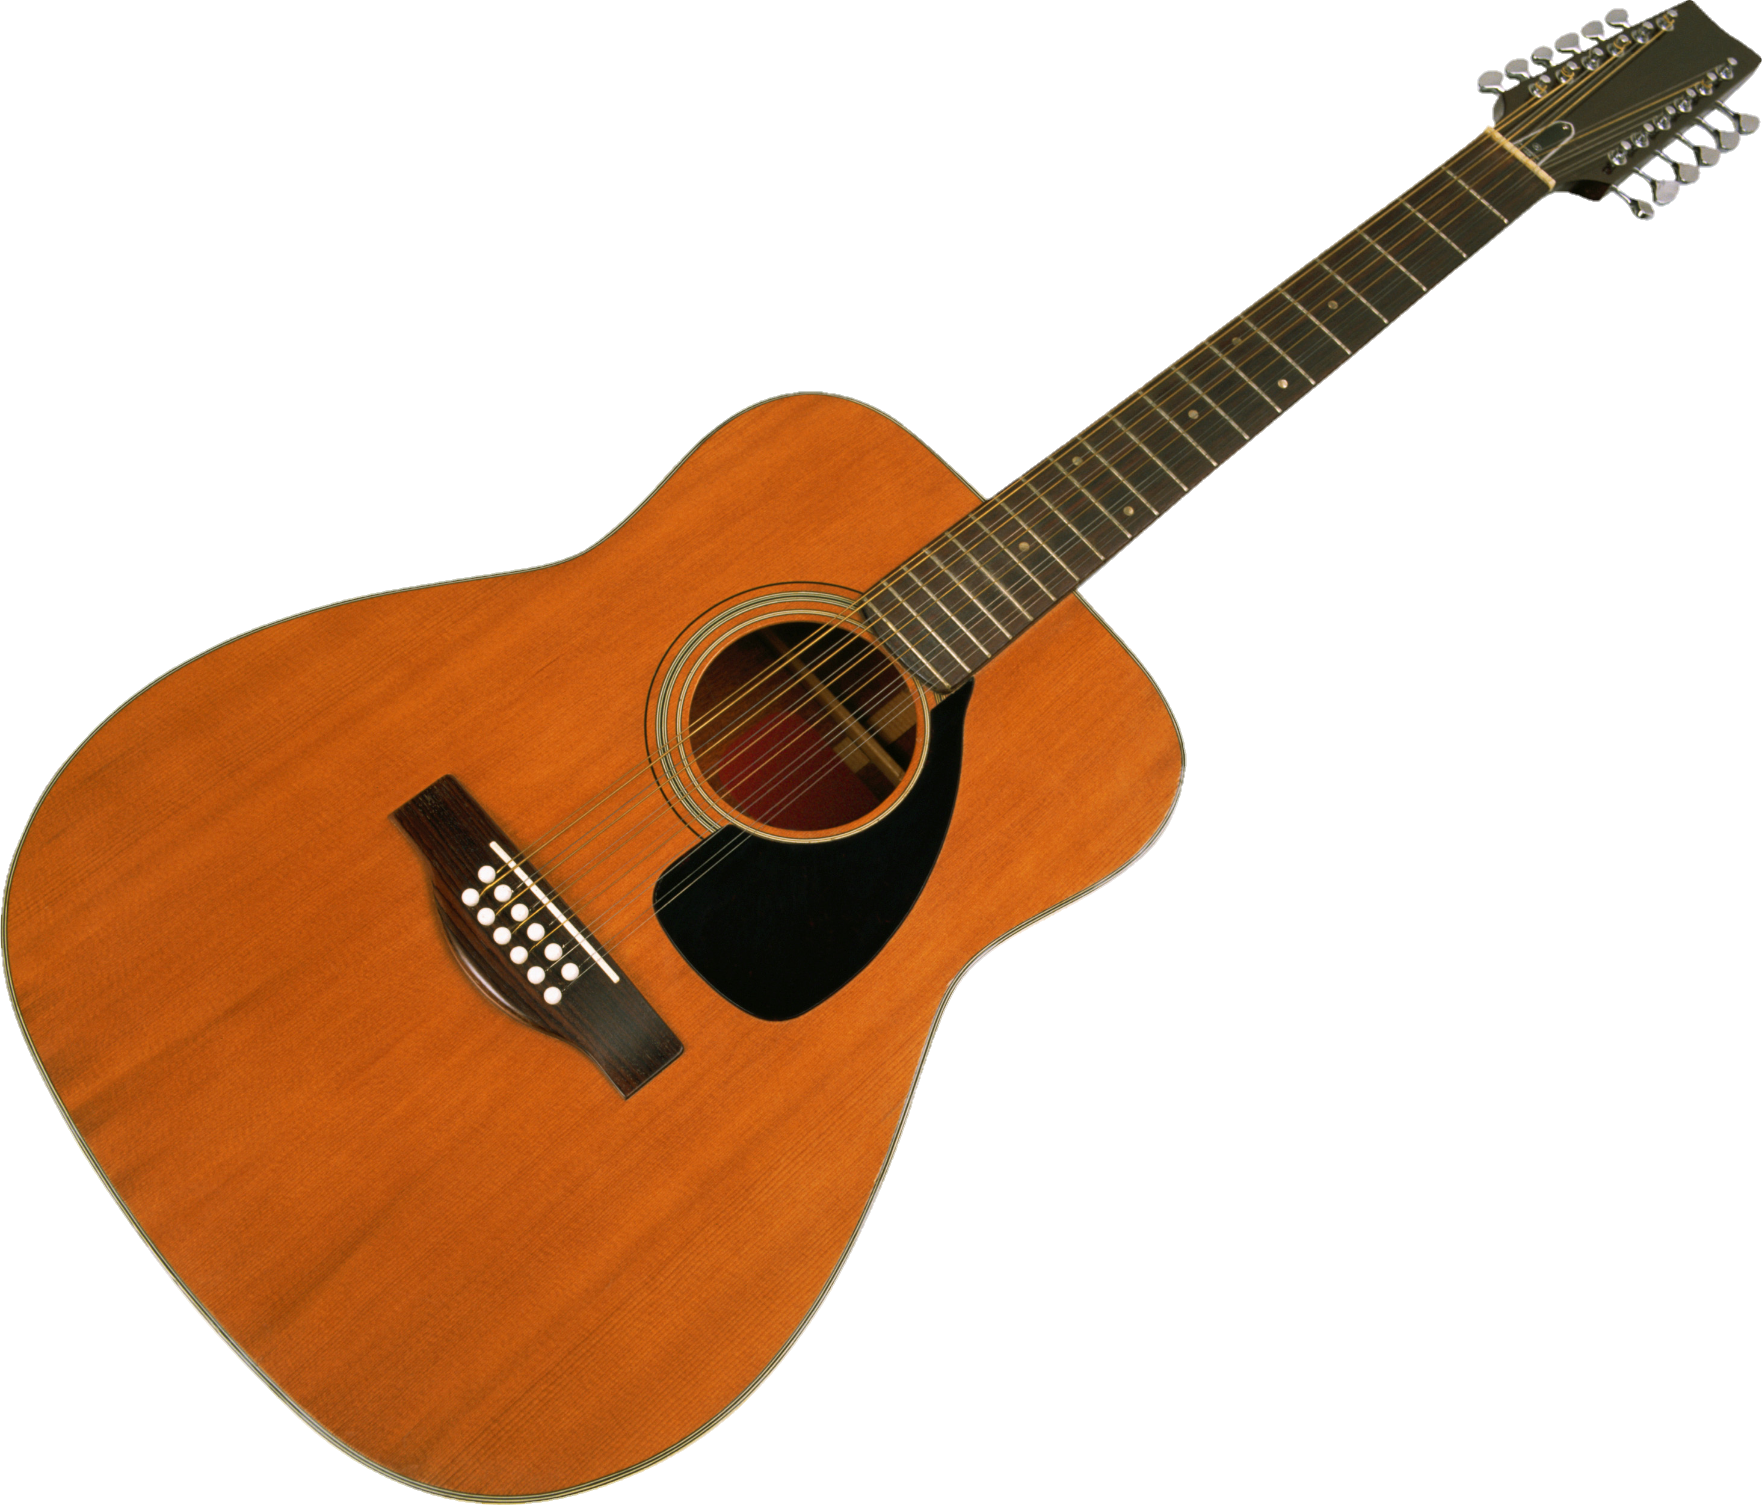 guitar-png-image-from-pngfre-32